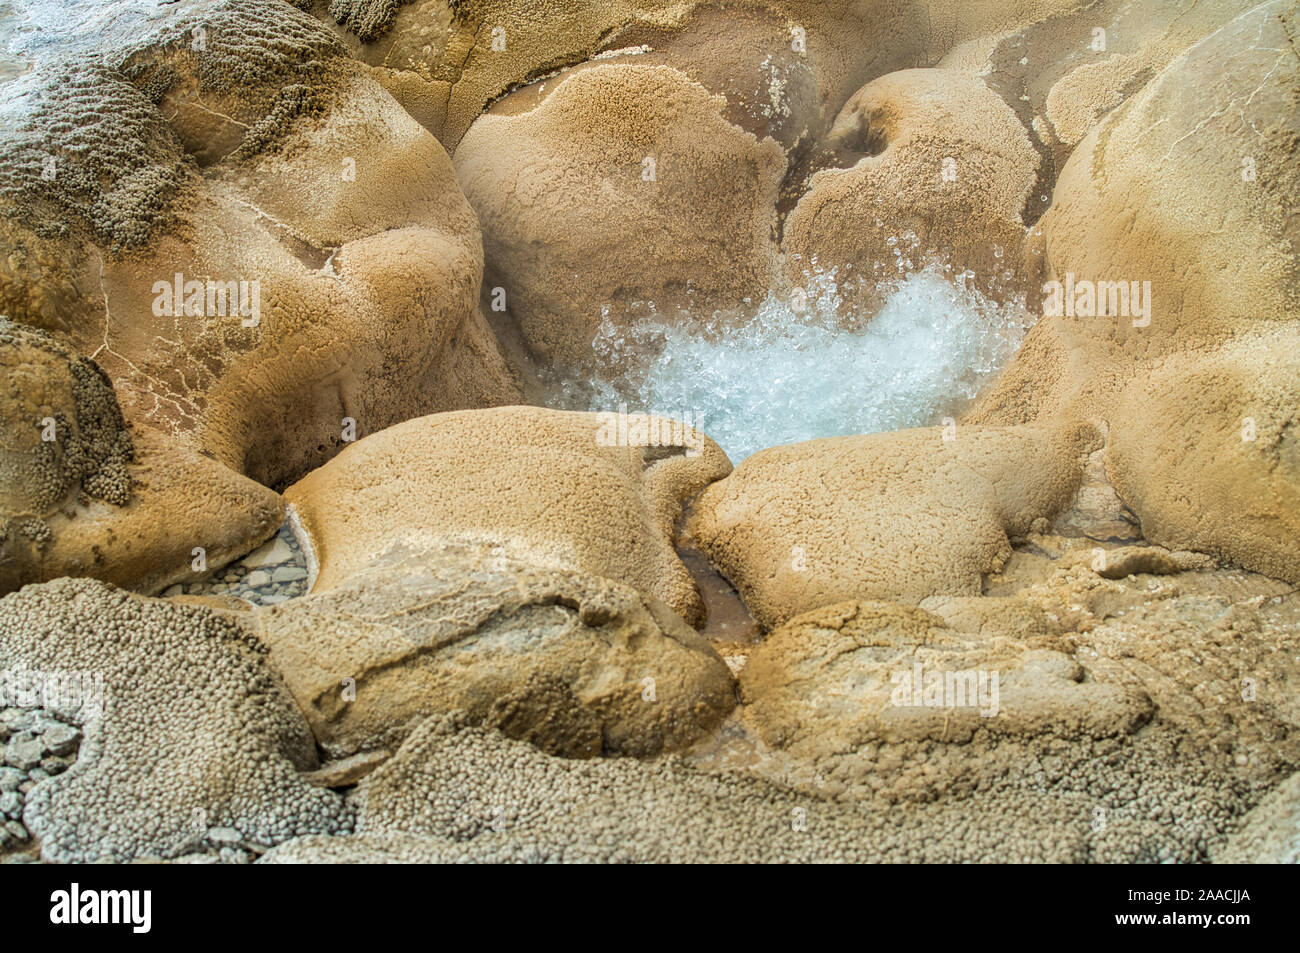 Pool of Yellowstone with hot water boiling. Stock Photo